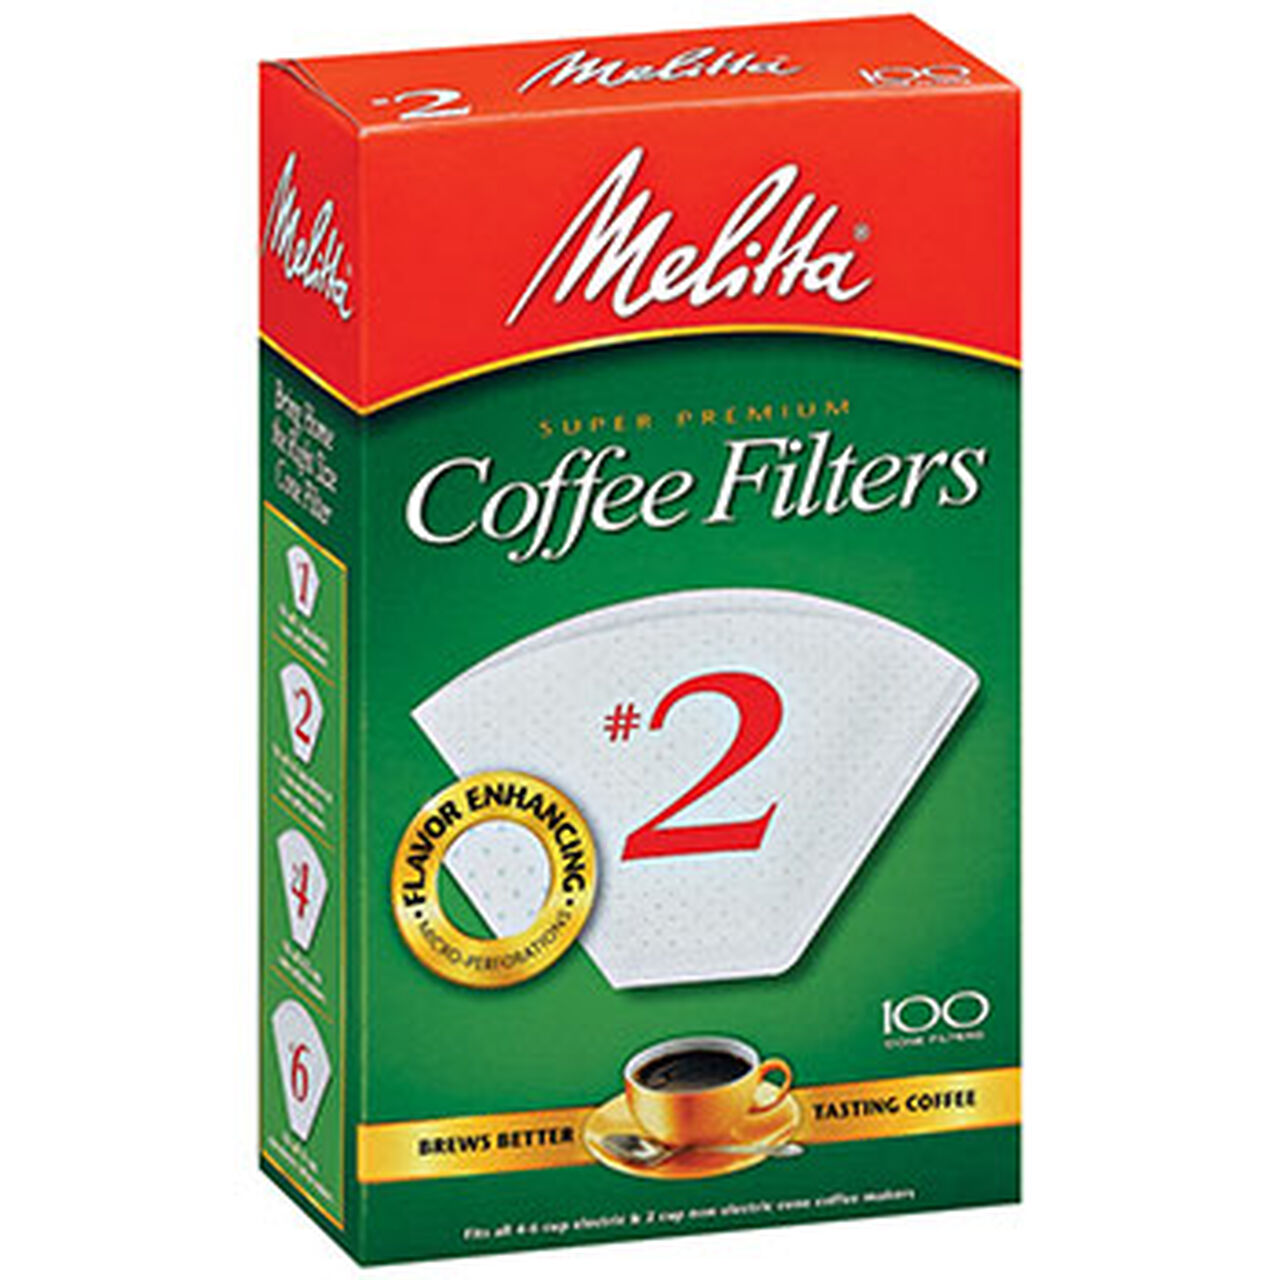 Melitta #2 Coffee Filters - (100ct.), , large image number 0